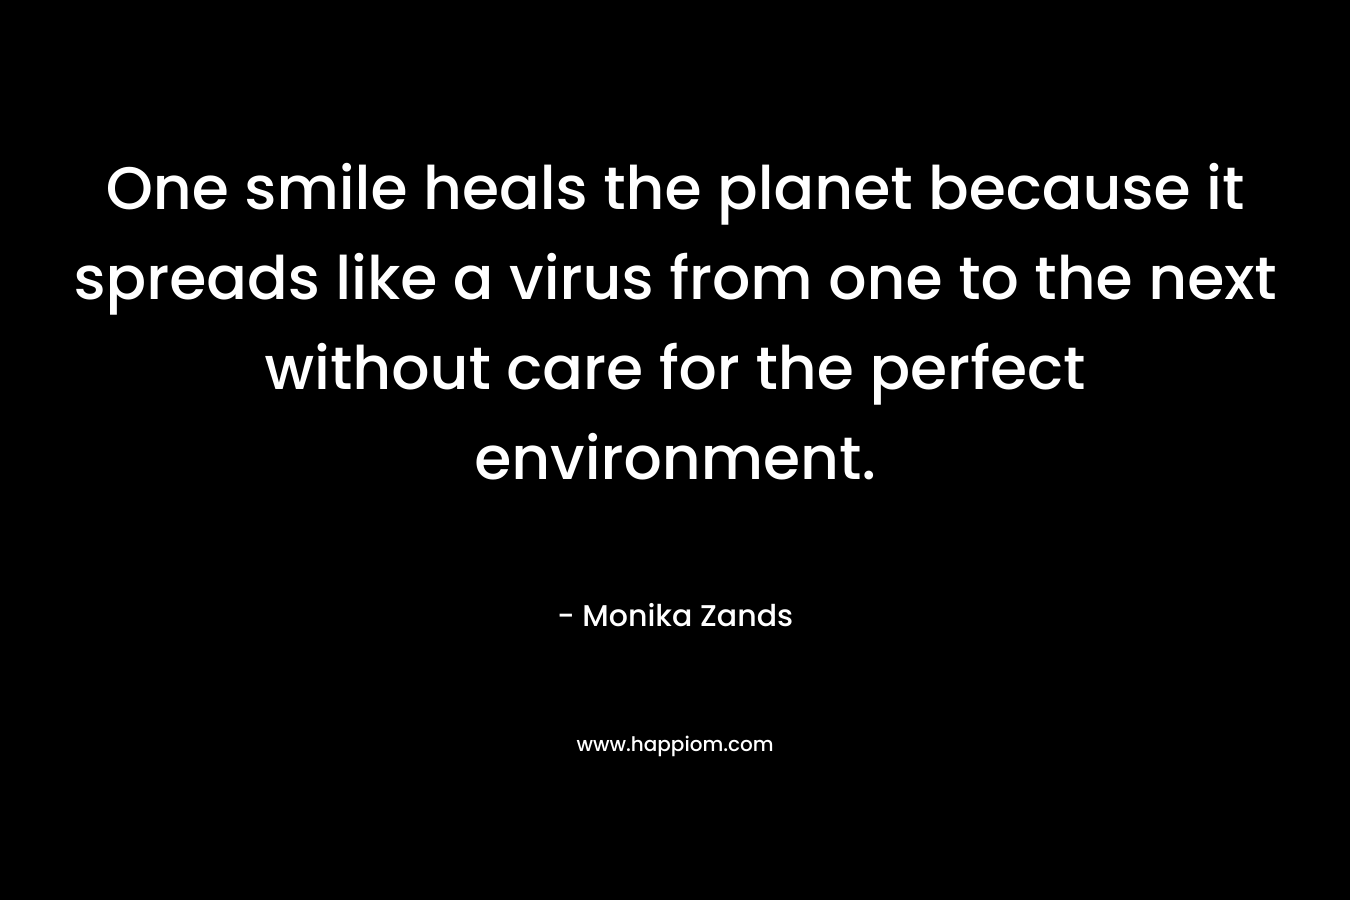 One smile heals the planet because it spreads like a virus from one to the next without care for the perfect environment. – Monika Zands